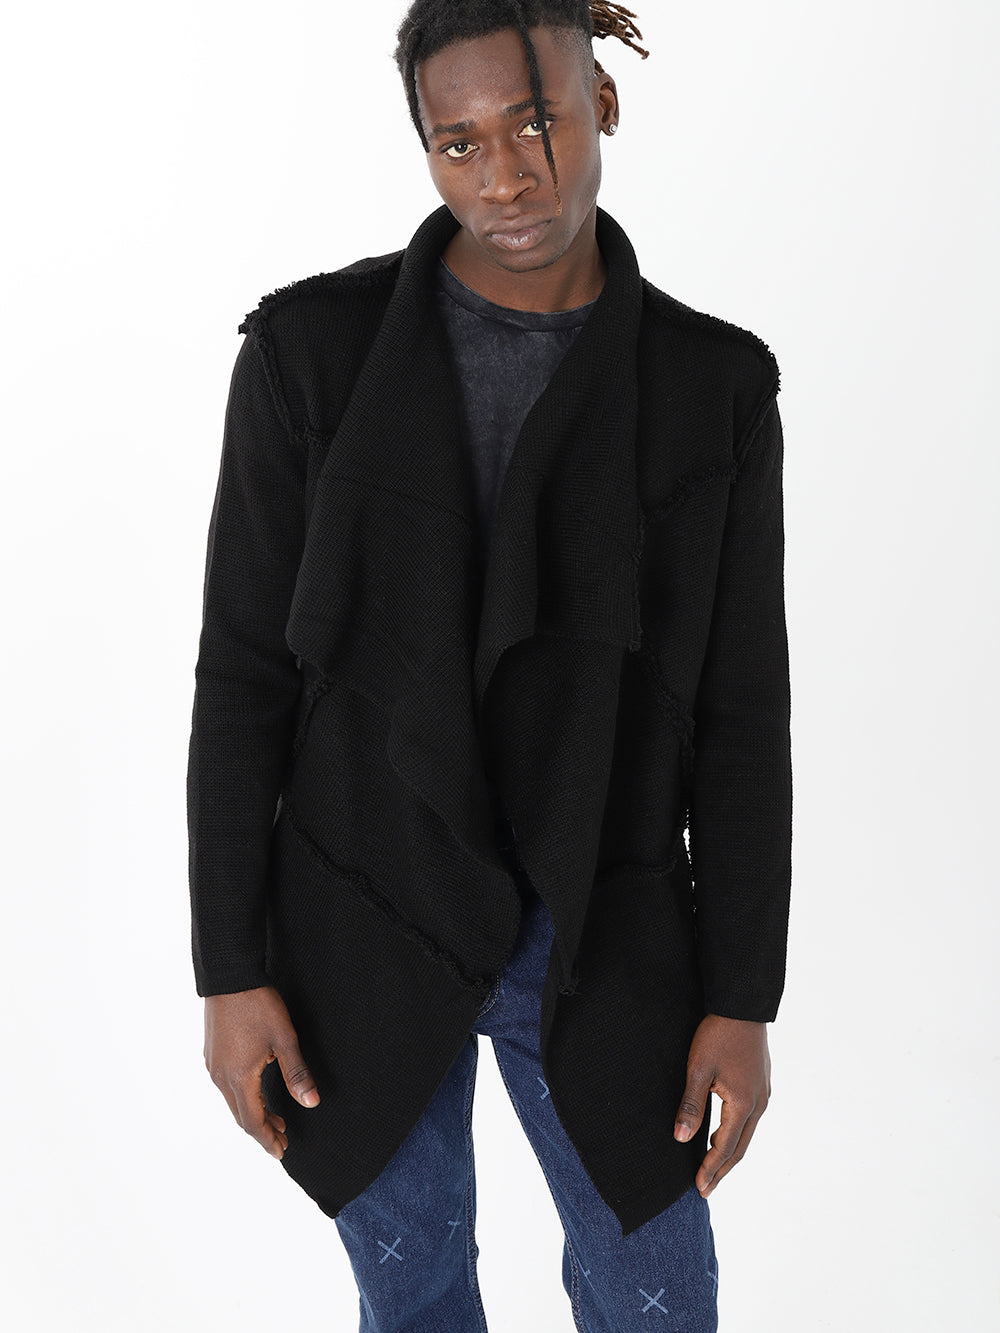 A man in skinny fit jeans and a HOODED DISTRESSED CARDIGAN // BLACK jacket.